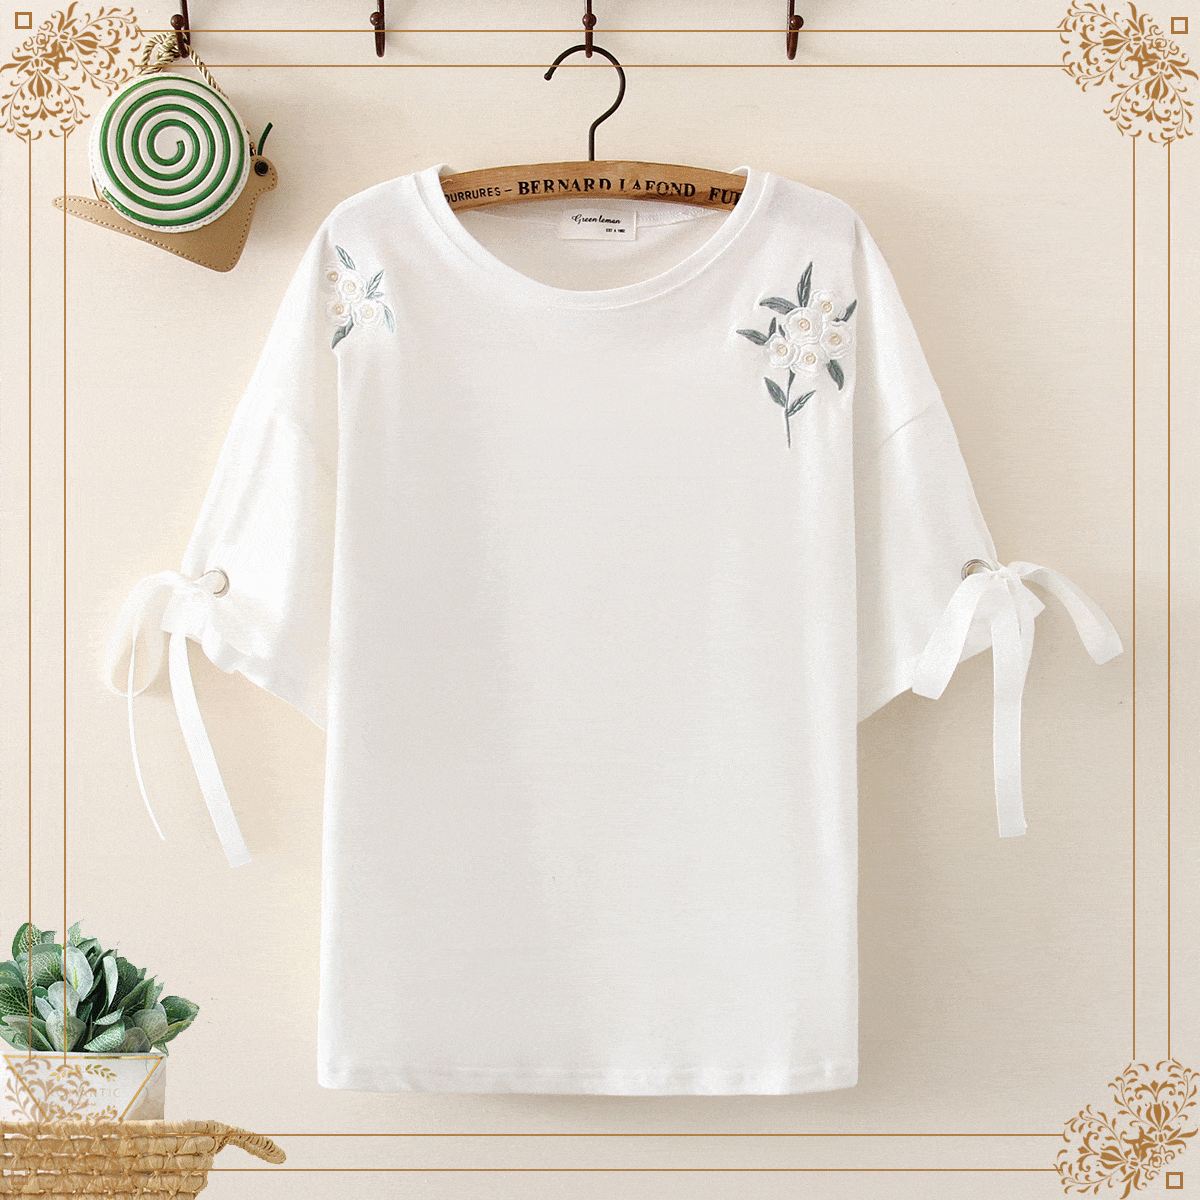 Kawaiifashion white Women's Sweet Floral Lace-up Sleeved Tees